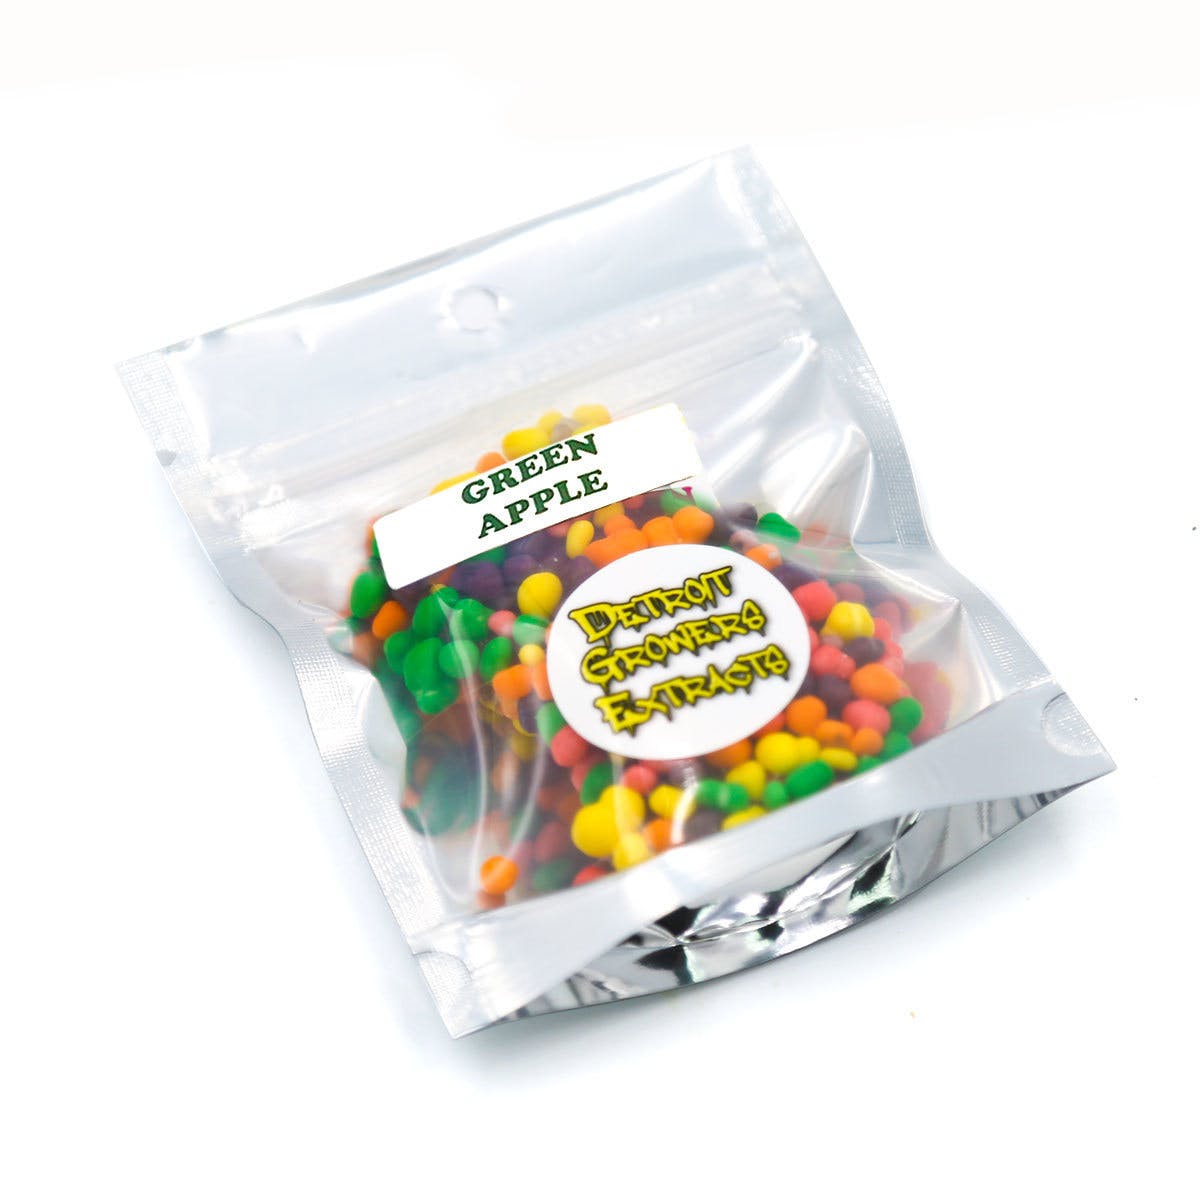 edible-detroit-growers-extracts-green-apple-nerds-rope-100mg